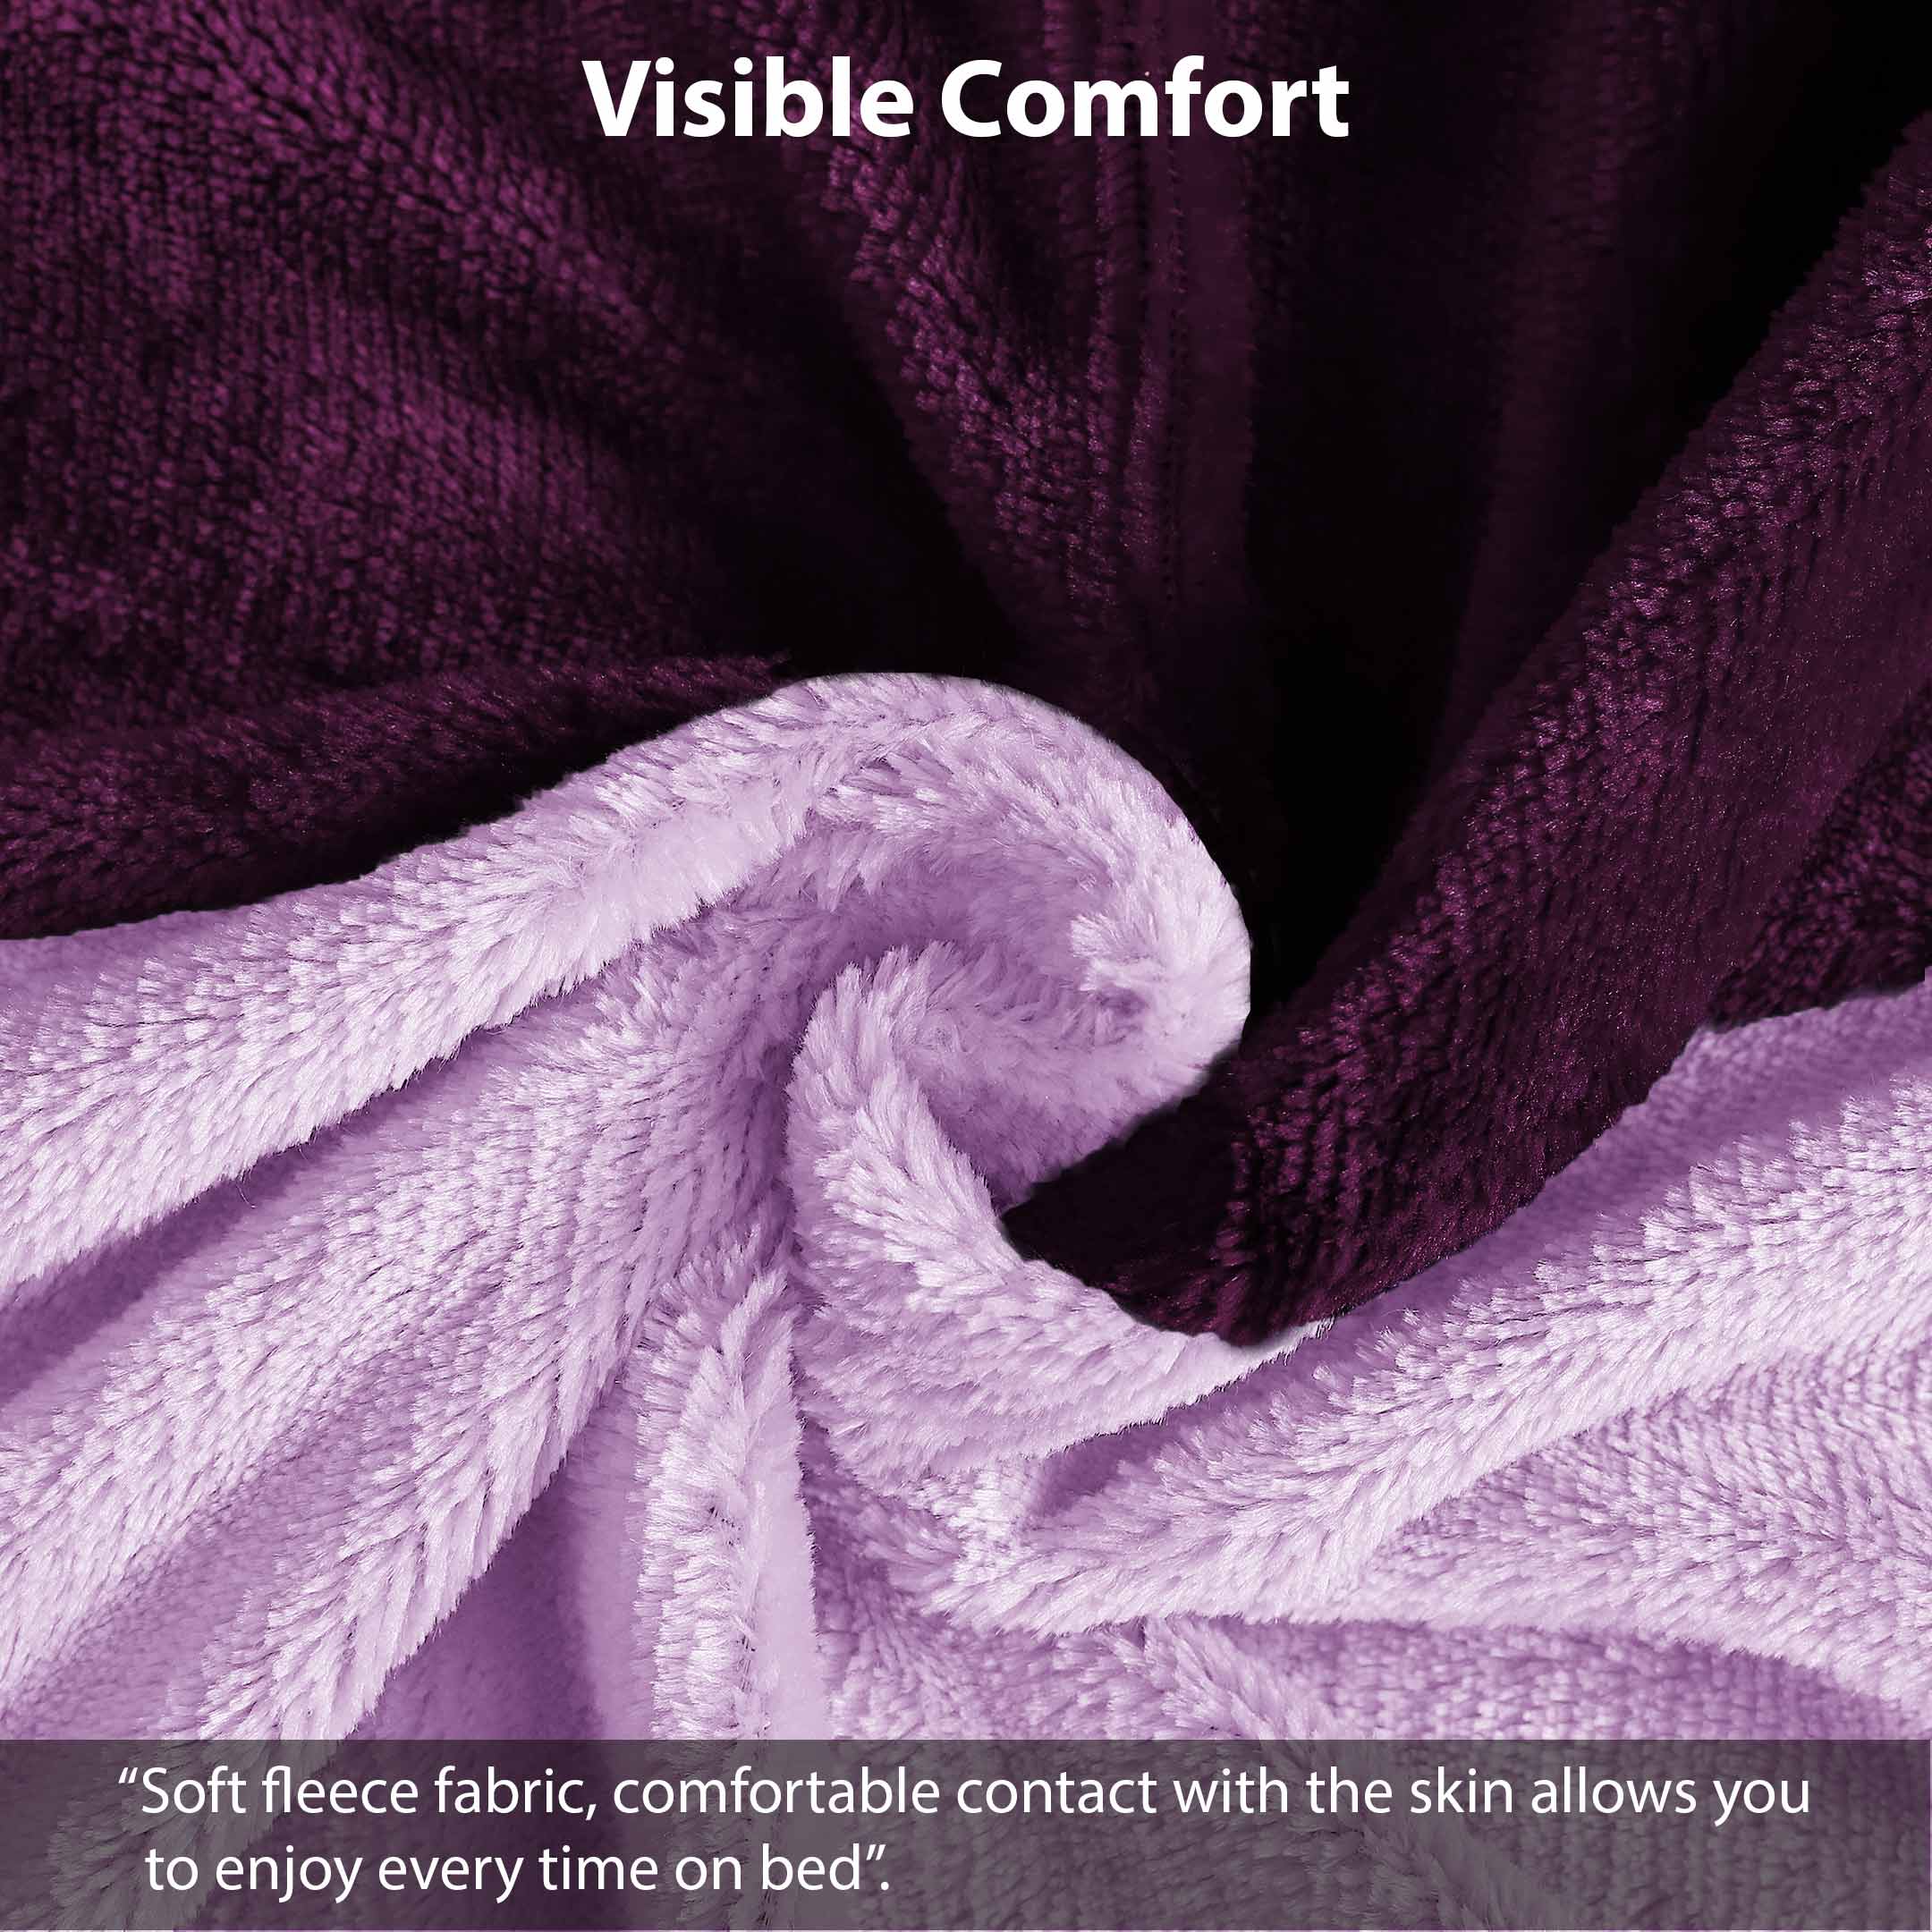 Vertical Duo Tone Fleece Fitted Sheet, Lilac-Plum